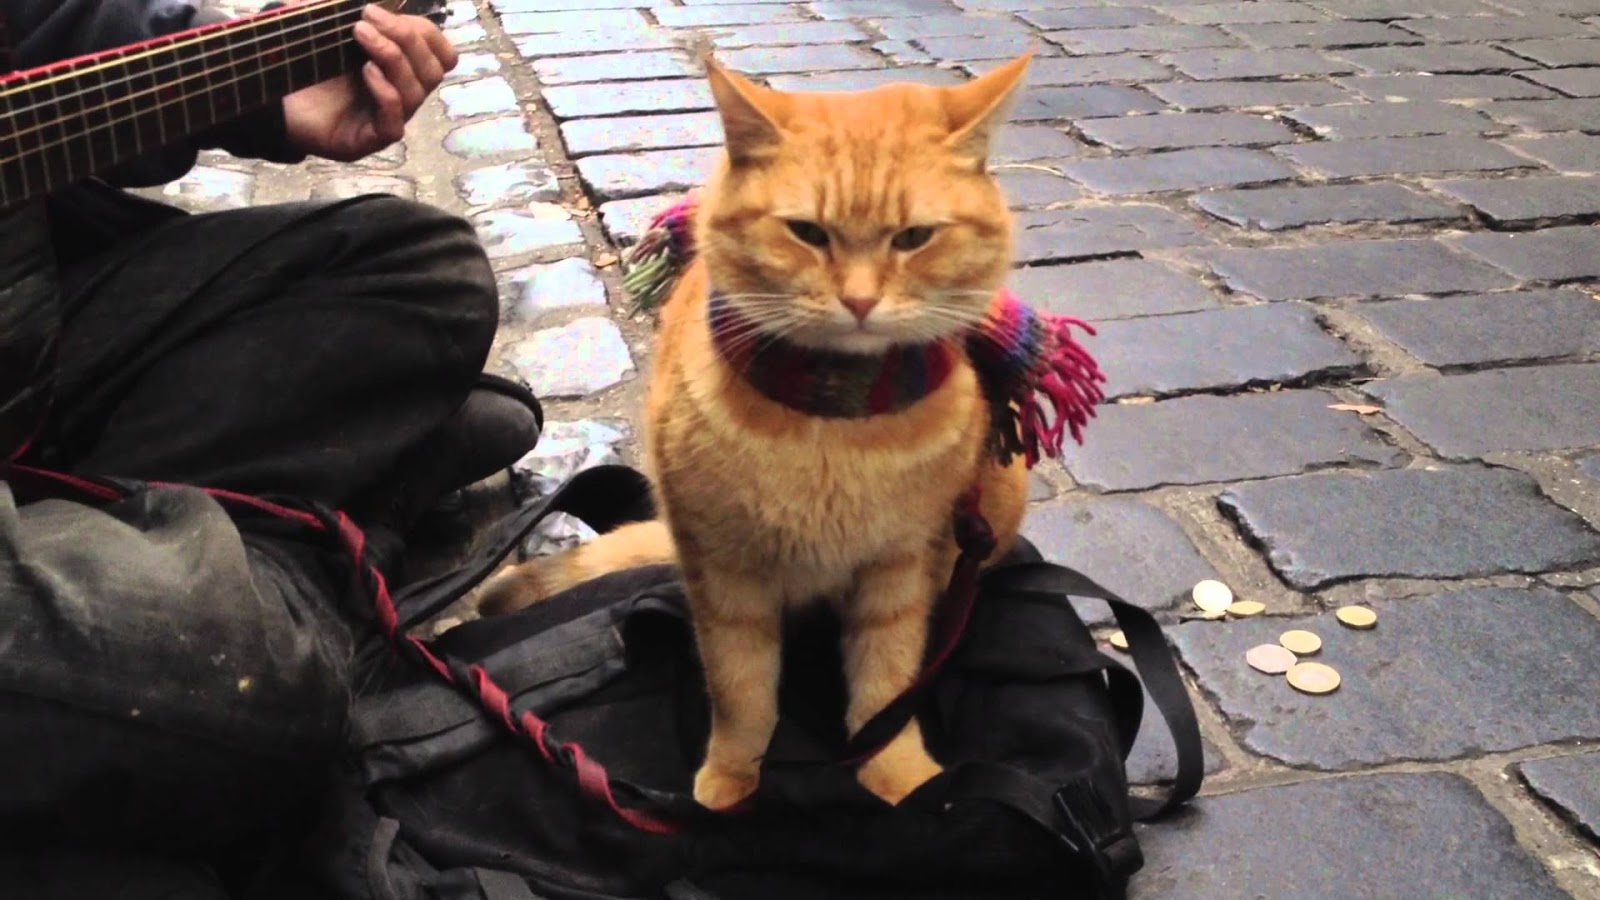 A Street Cat Named Bob Movie Review